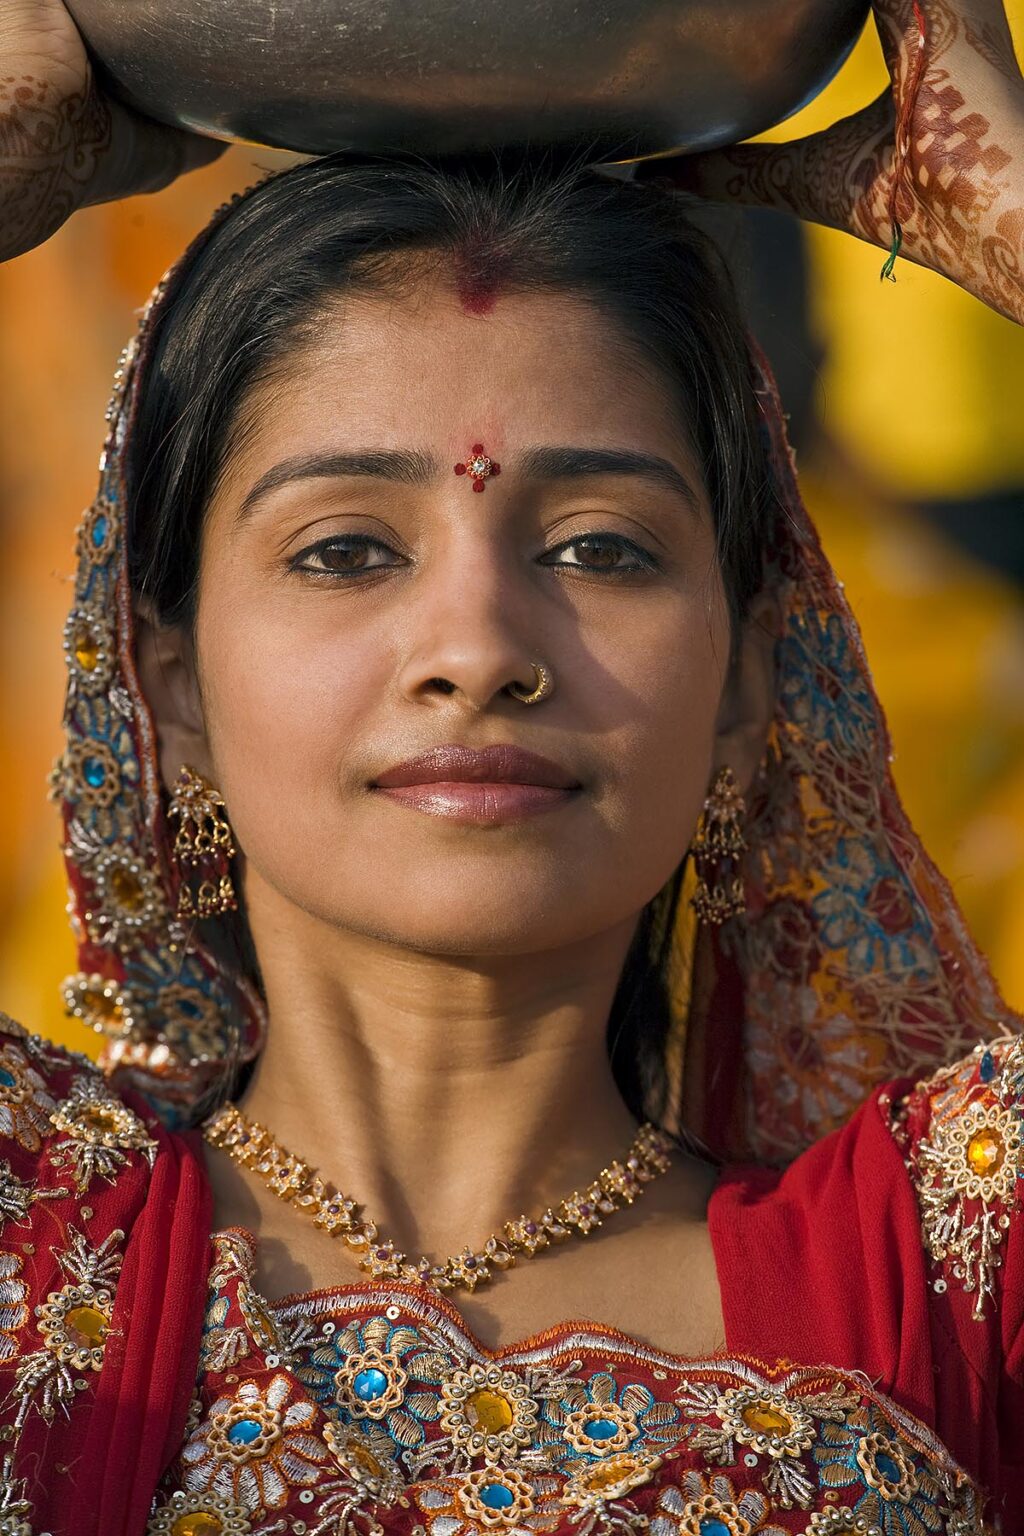 A Rajasthani woman dresses in her finest clothing and jewelry to celebrate at the GANGUR FESTIVAL or MEWAR FESTIVAL in UDAIPUR, RAJASTHAN, INDIA